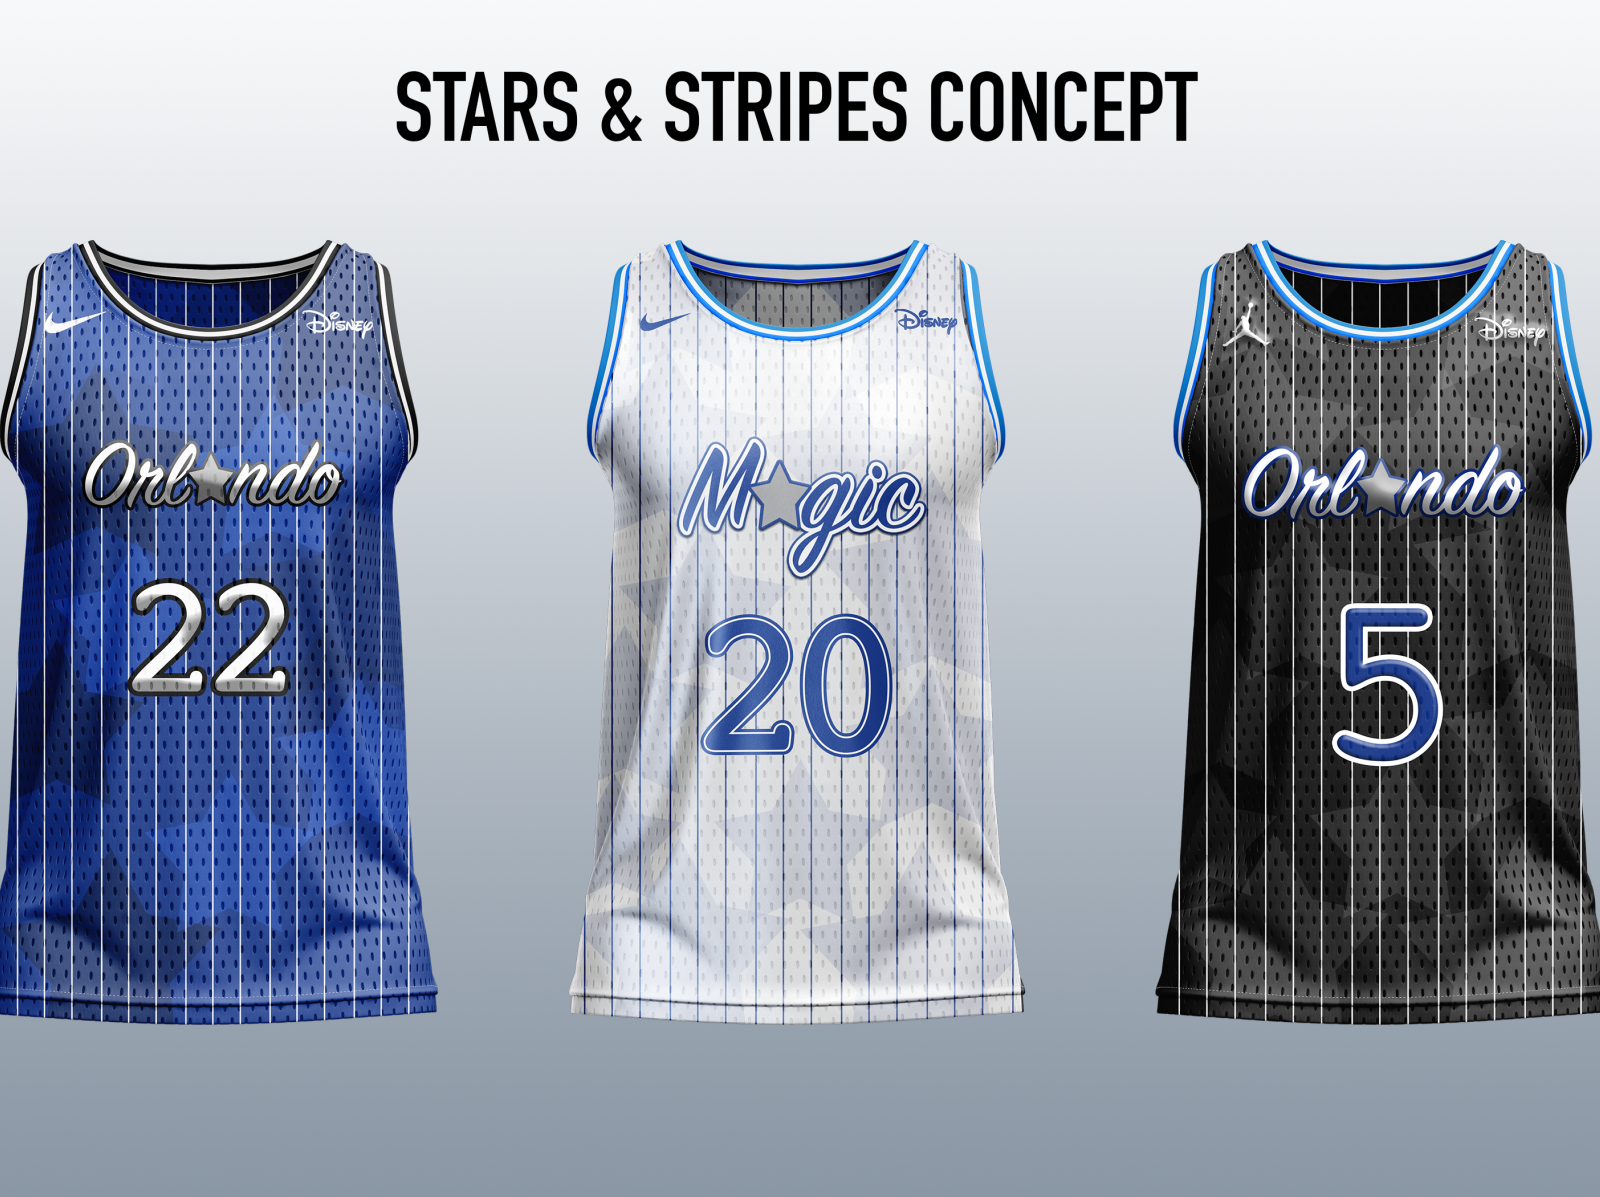 Orlando Magic Jersey Concepts by Logan Holt on Dribbble